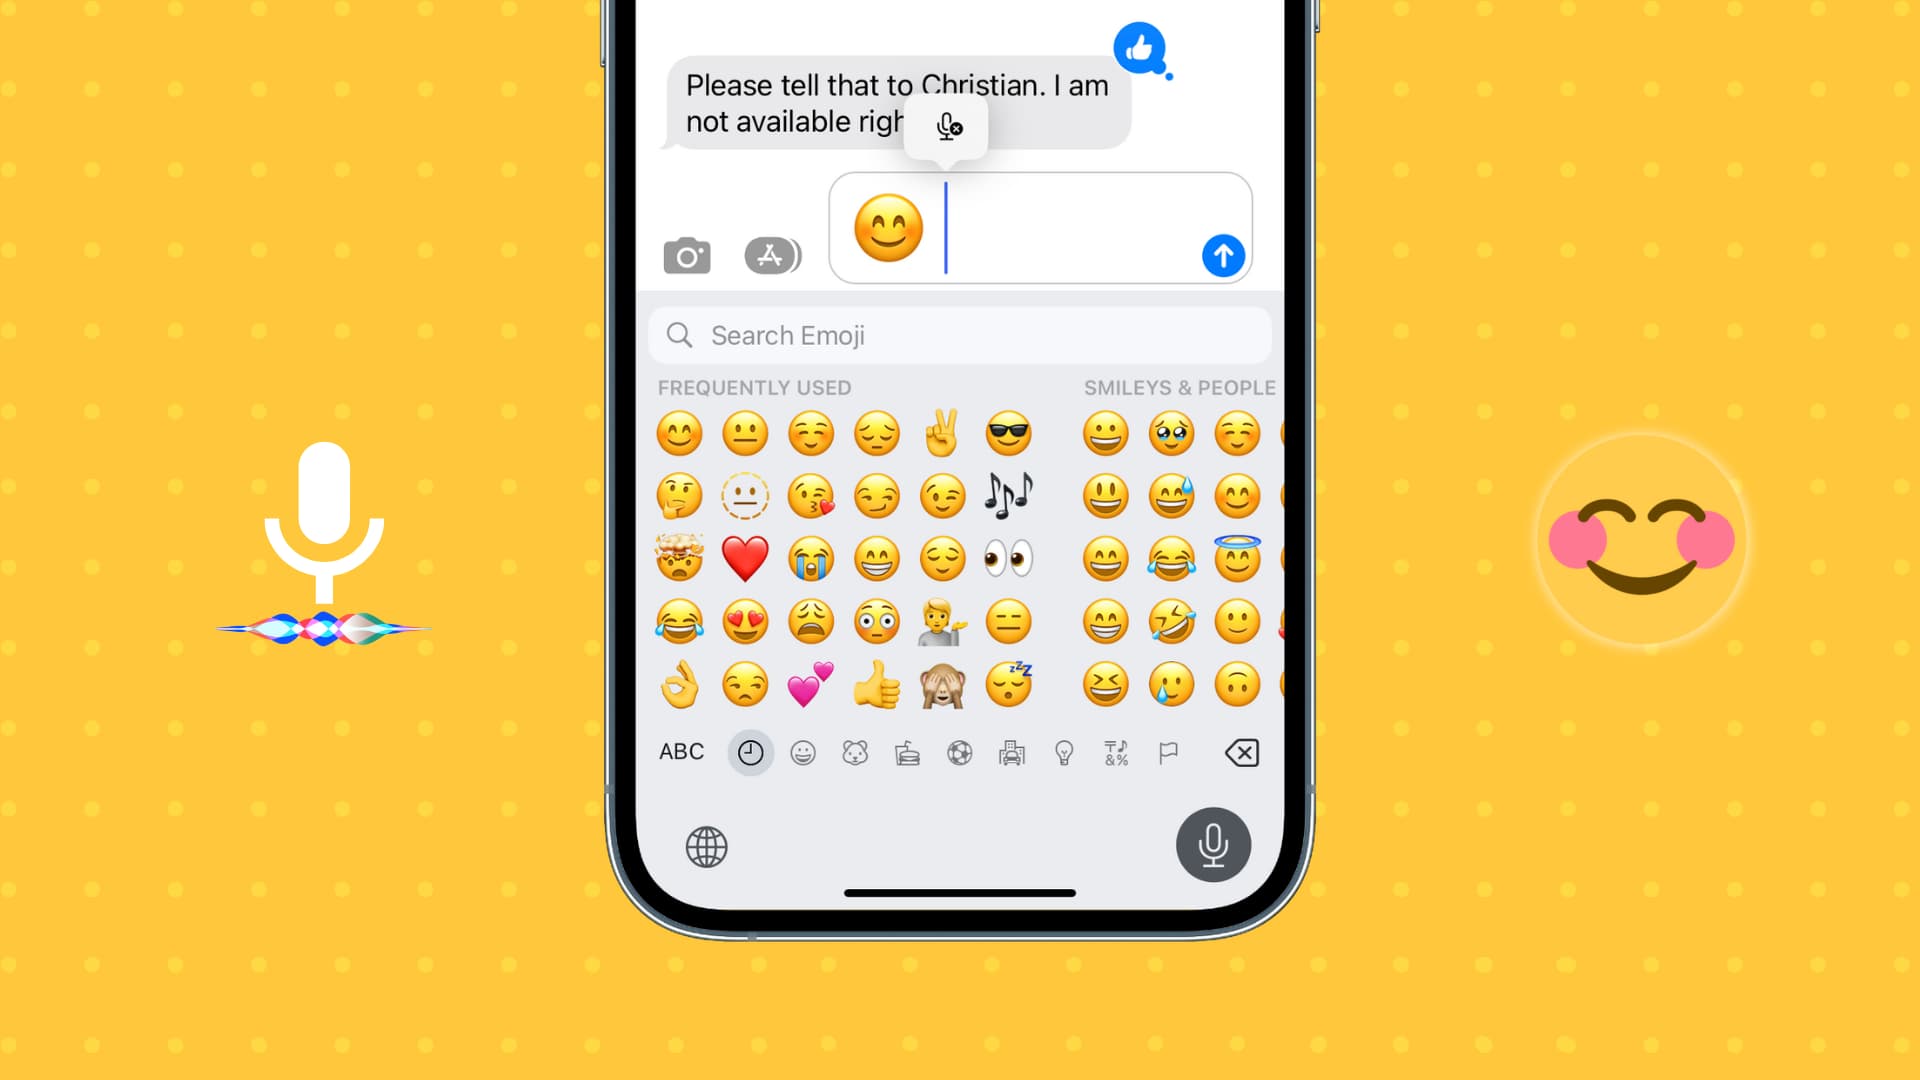 How to insert an emoji using Siri or Dictation on iPhone in iOS 16